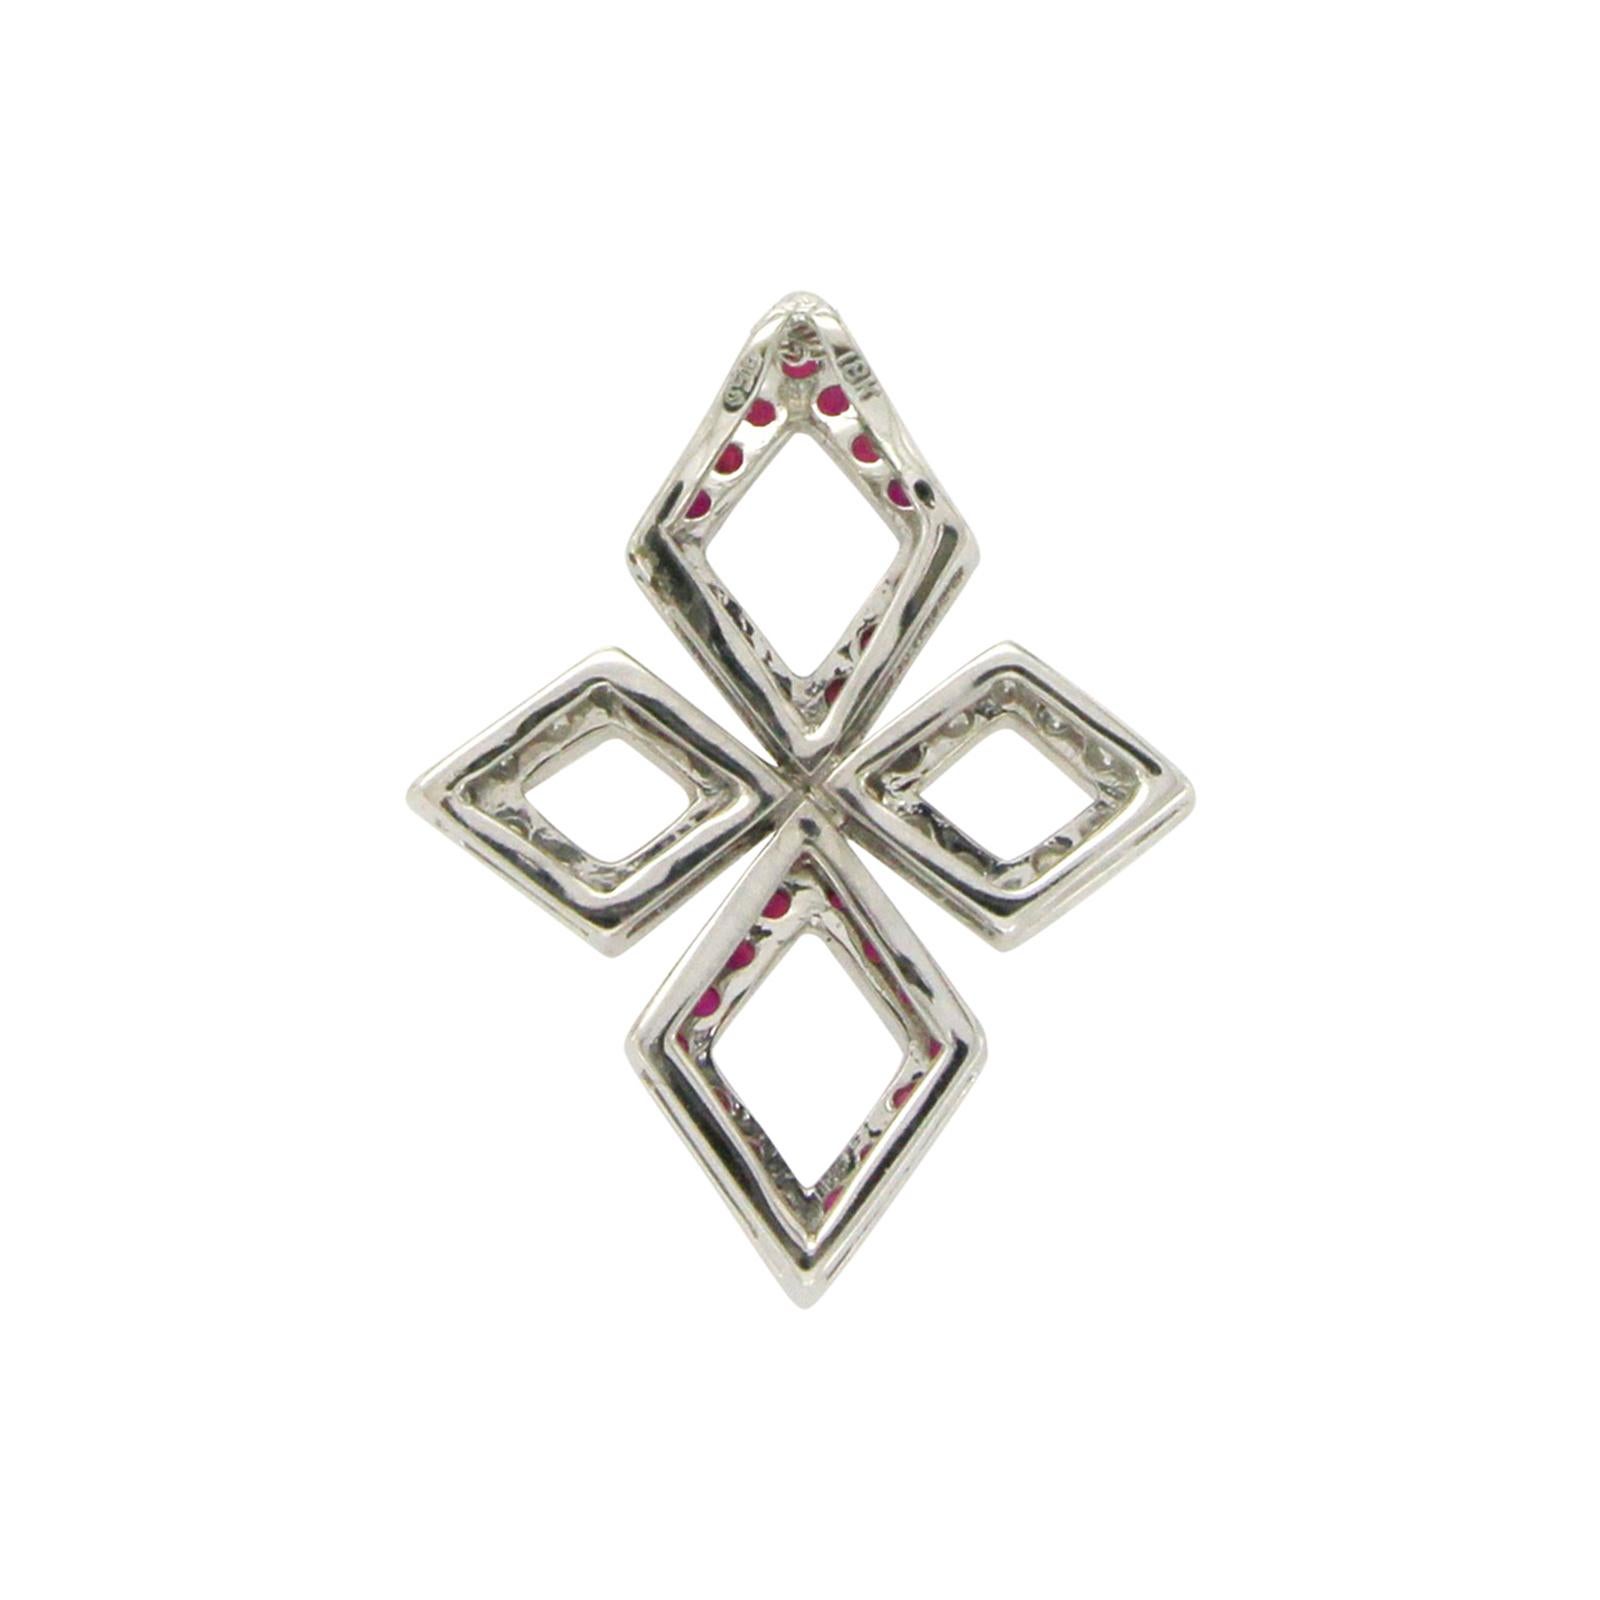 Type: Pendant
Height: 29 mm
Weight: 22 mm
Metal: White Gold
Metal Purity: 18KStone Type:SI1-VS G-H 0.60 CT Diamond and 1.20 Ruby
Hallmarks: 750
Total Weight: 4.1 Grams
Condition: New
Stock Number: NP117